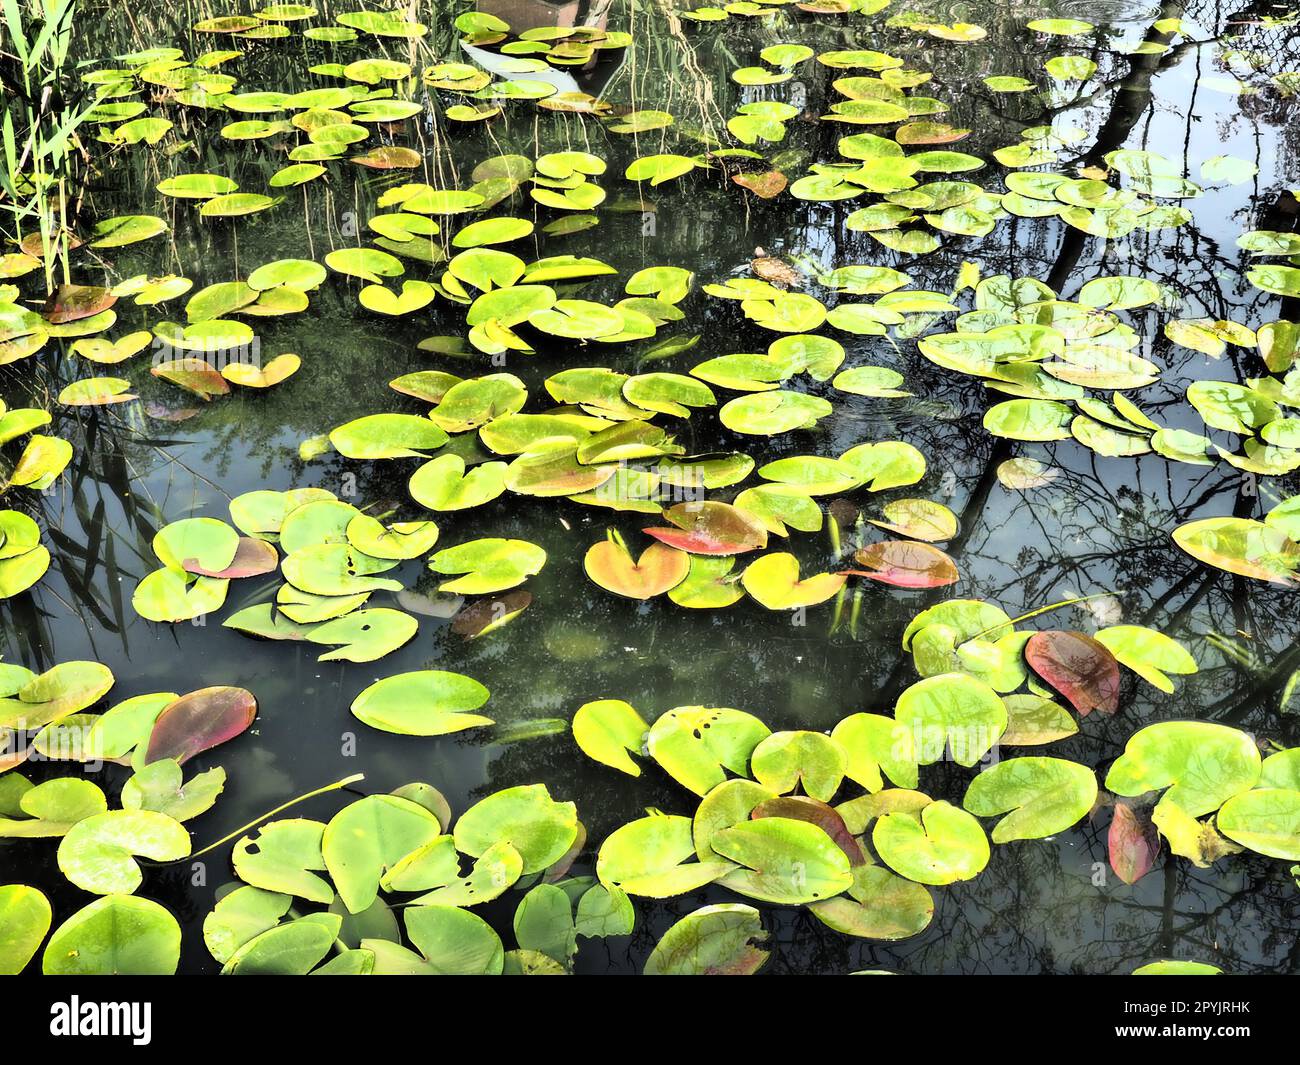 Water lily leaves, known as lily pads. Large cracked and yellow leaves of an aquatic plant on the surface of a pond or swamp. Water lily, or Nymphaean Nymphaeaceae - family of flowering plants Stock Photo